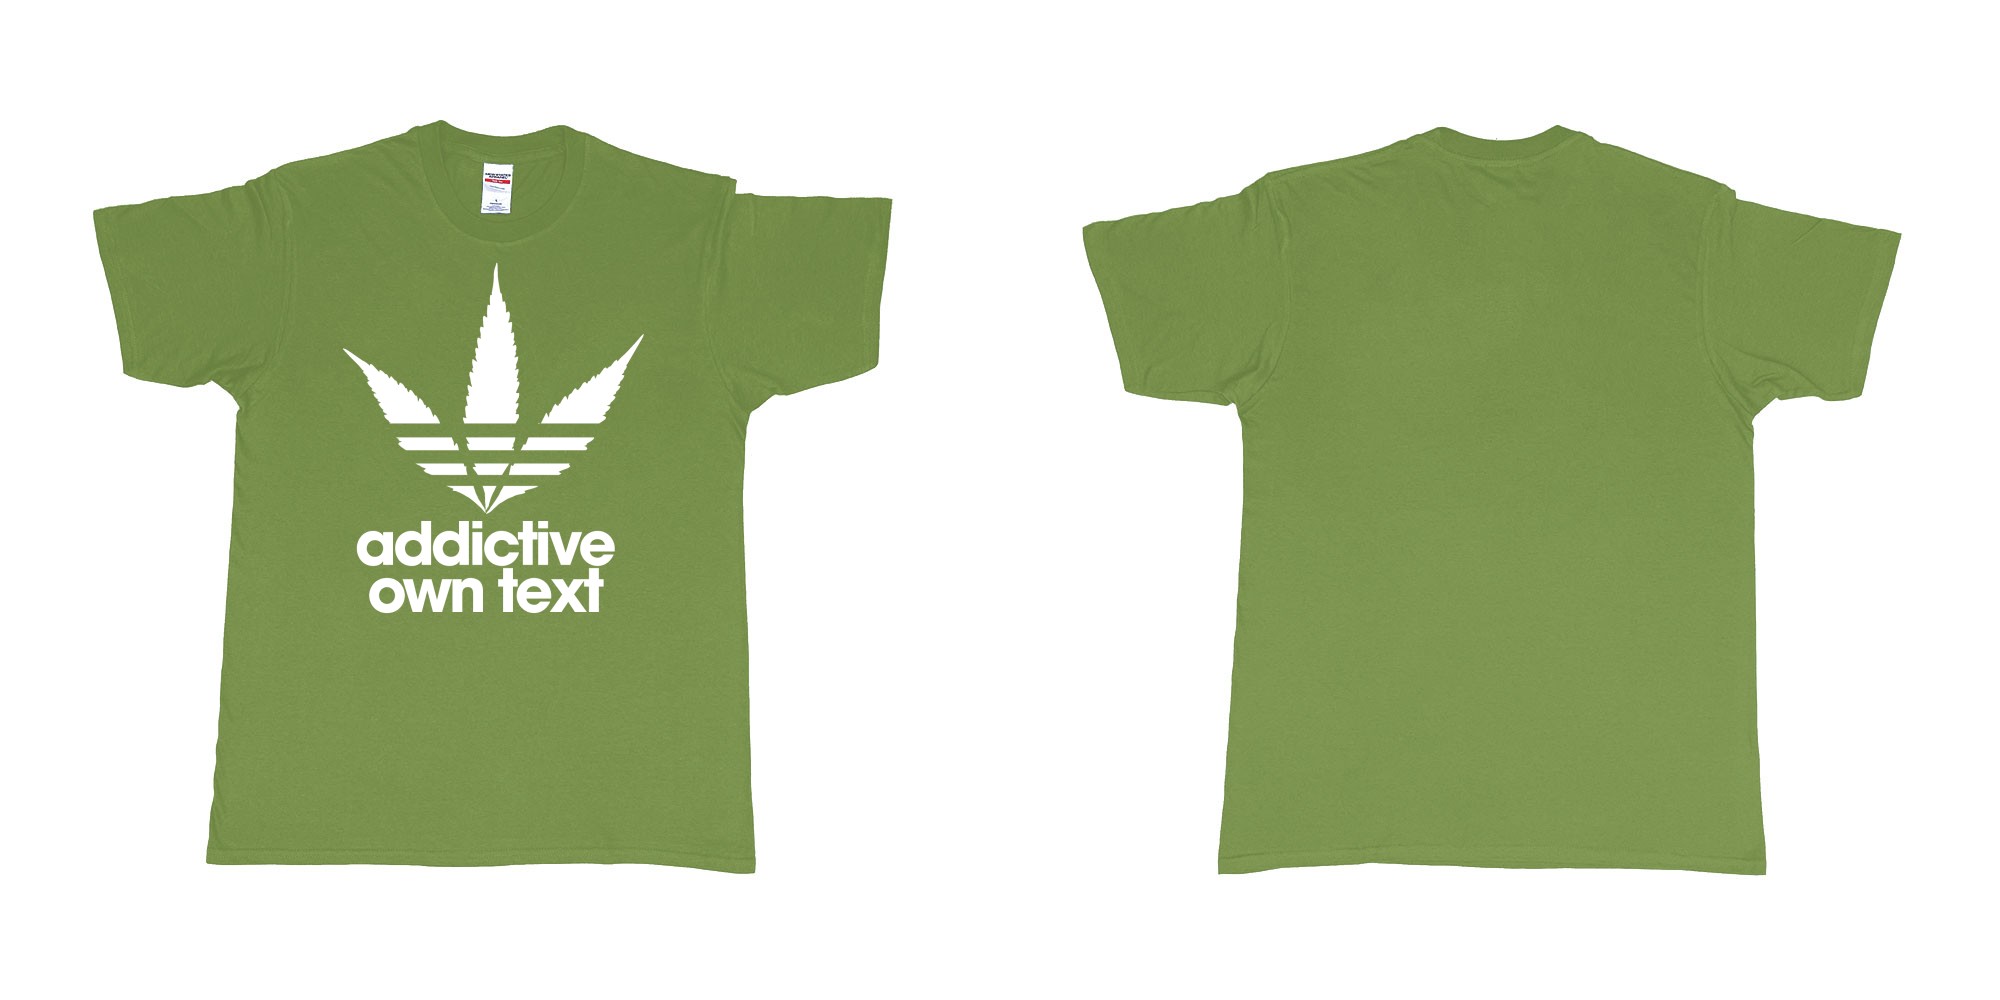 Custom tshirt design adidas ganja addictive own custom printed text in fabric color military-green choice your own text made in Bali by The Pirate Way